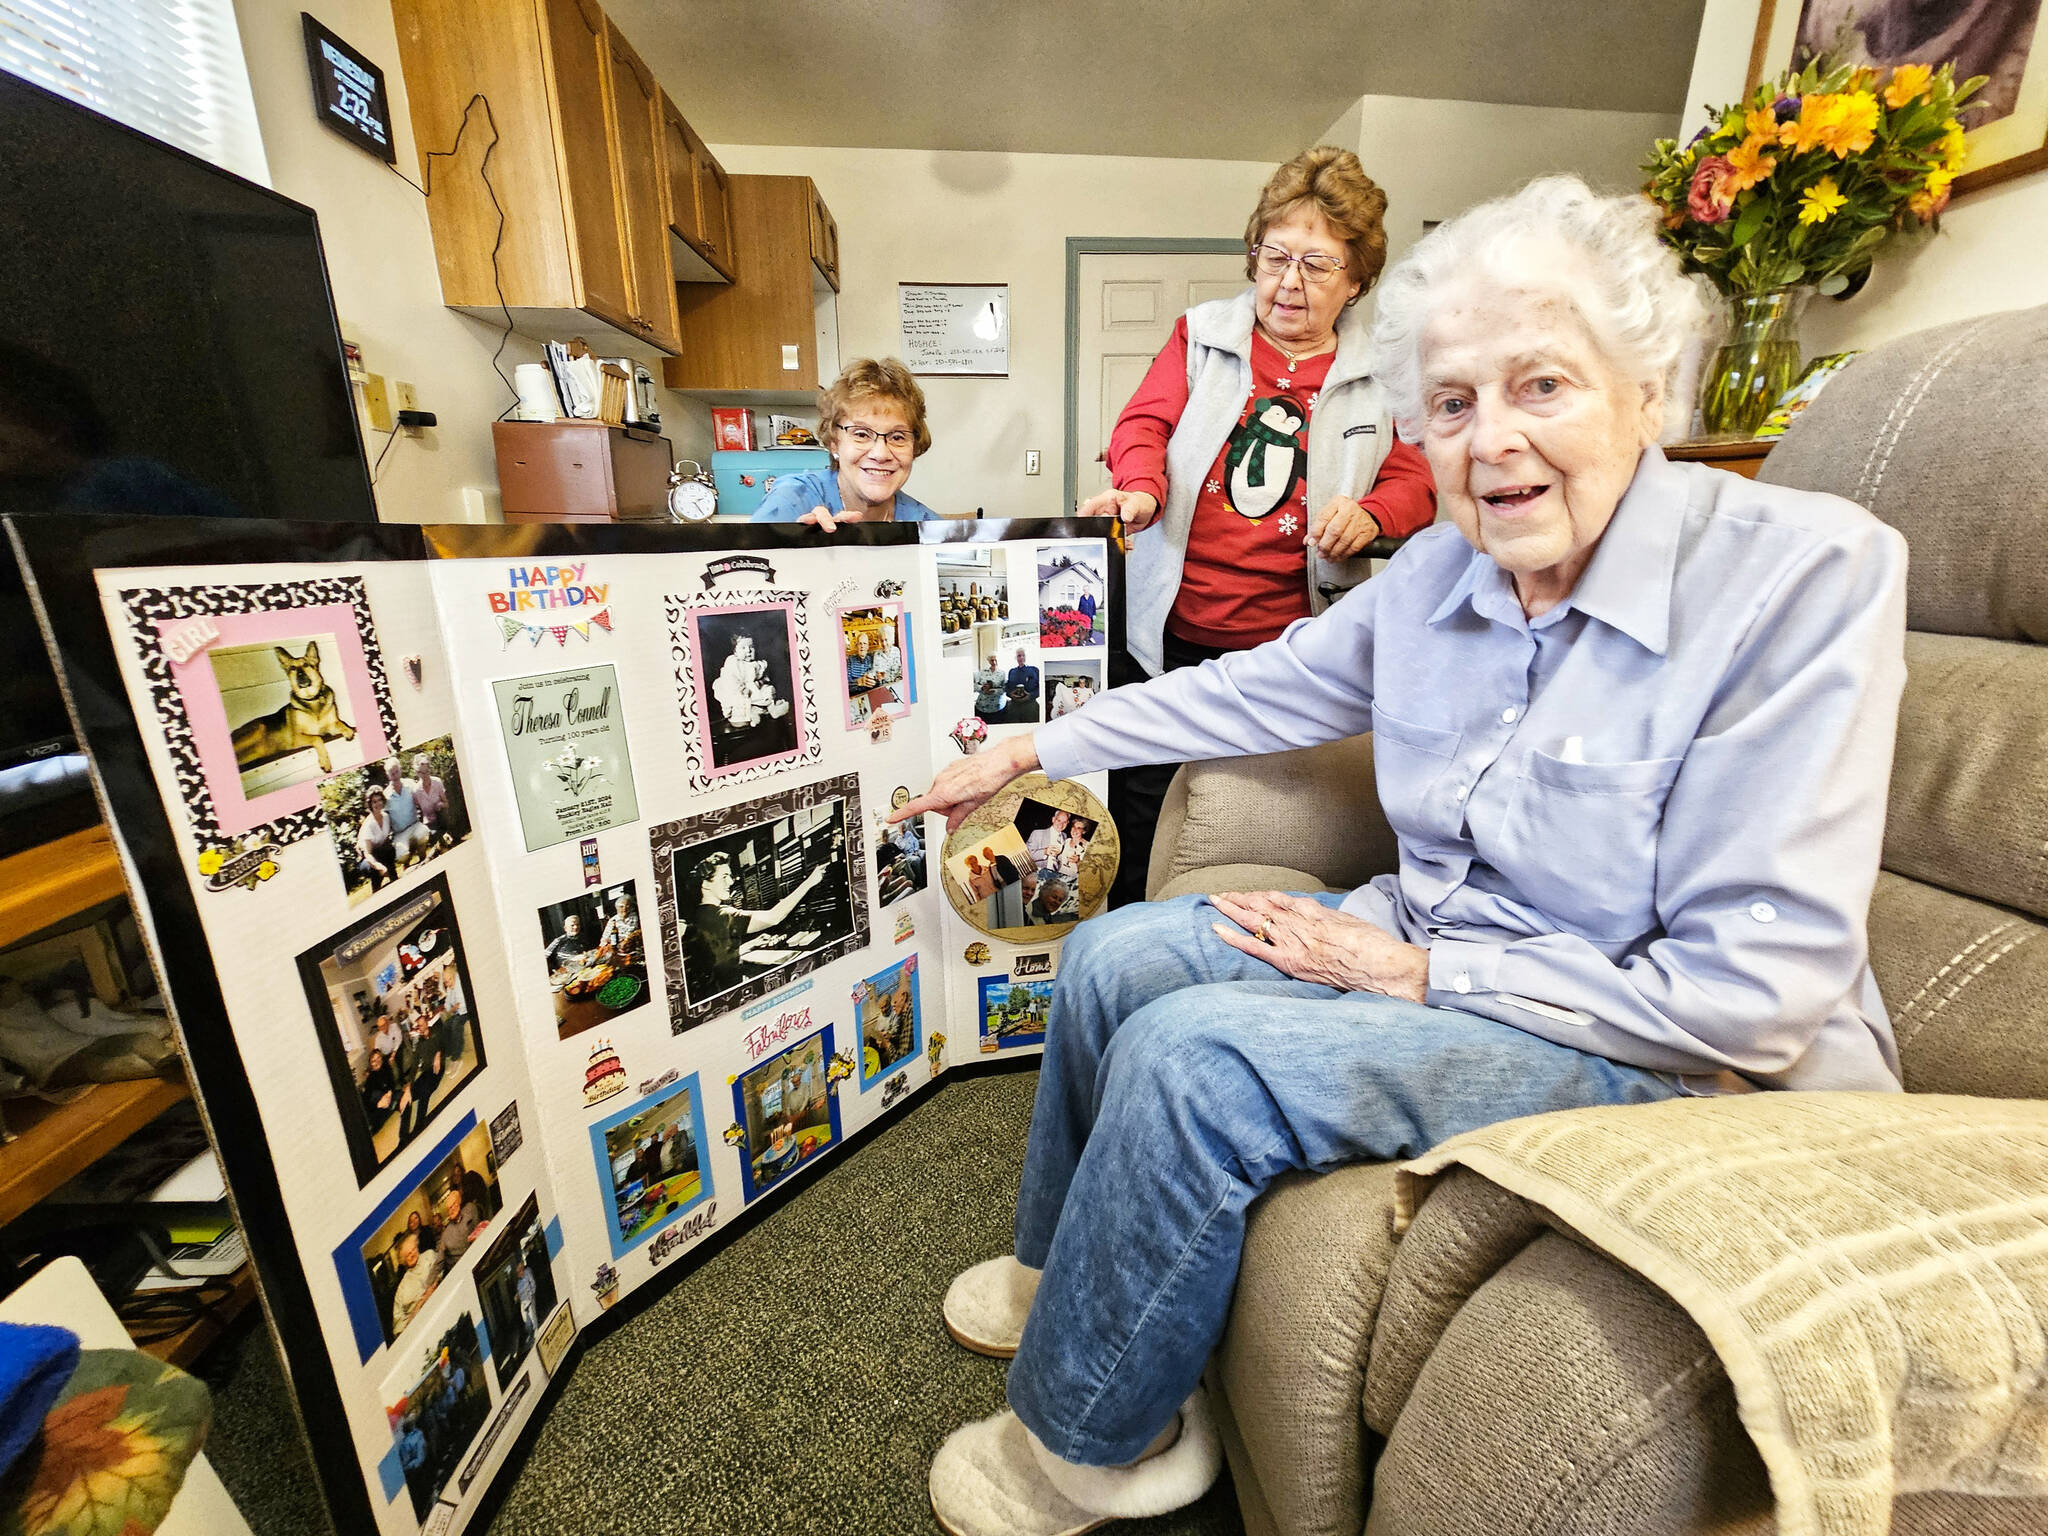 Photo by Ray Miller-Still
Heritage House staff and residents put together a collage of Teresa’s life for her birthday party. Here, Teresa is showing off a picture of her working as a telephone operator.